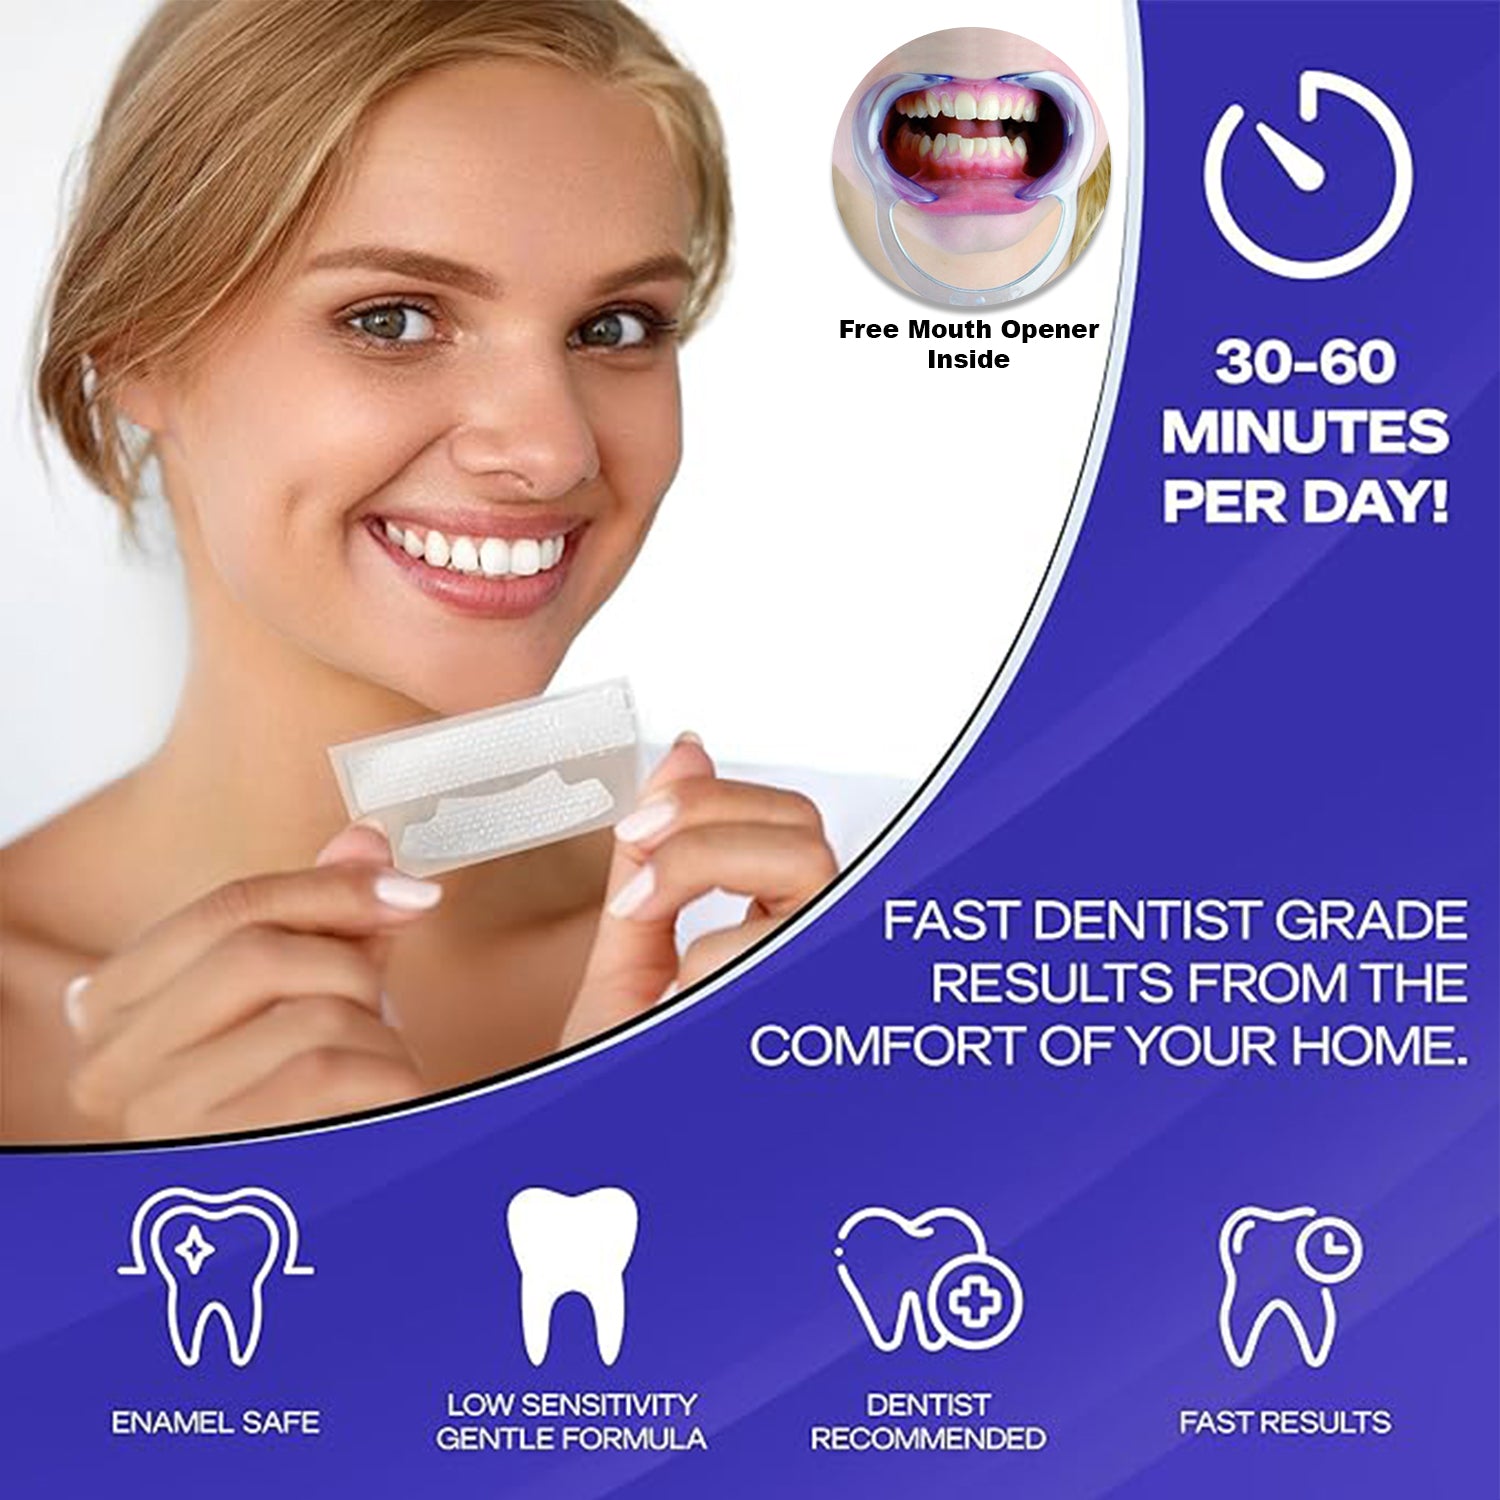 HomeGenics Teeth Whitening Strips - 20 Sessions, Peroxide-Free Kit with Free Mouth Opener